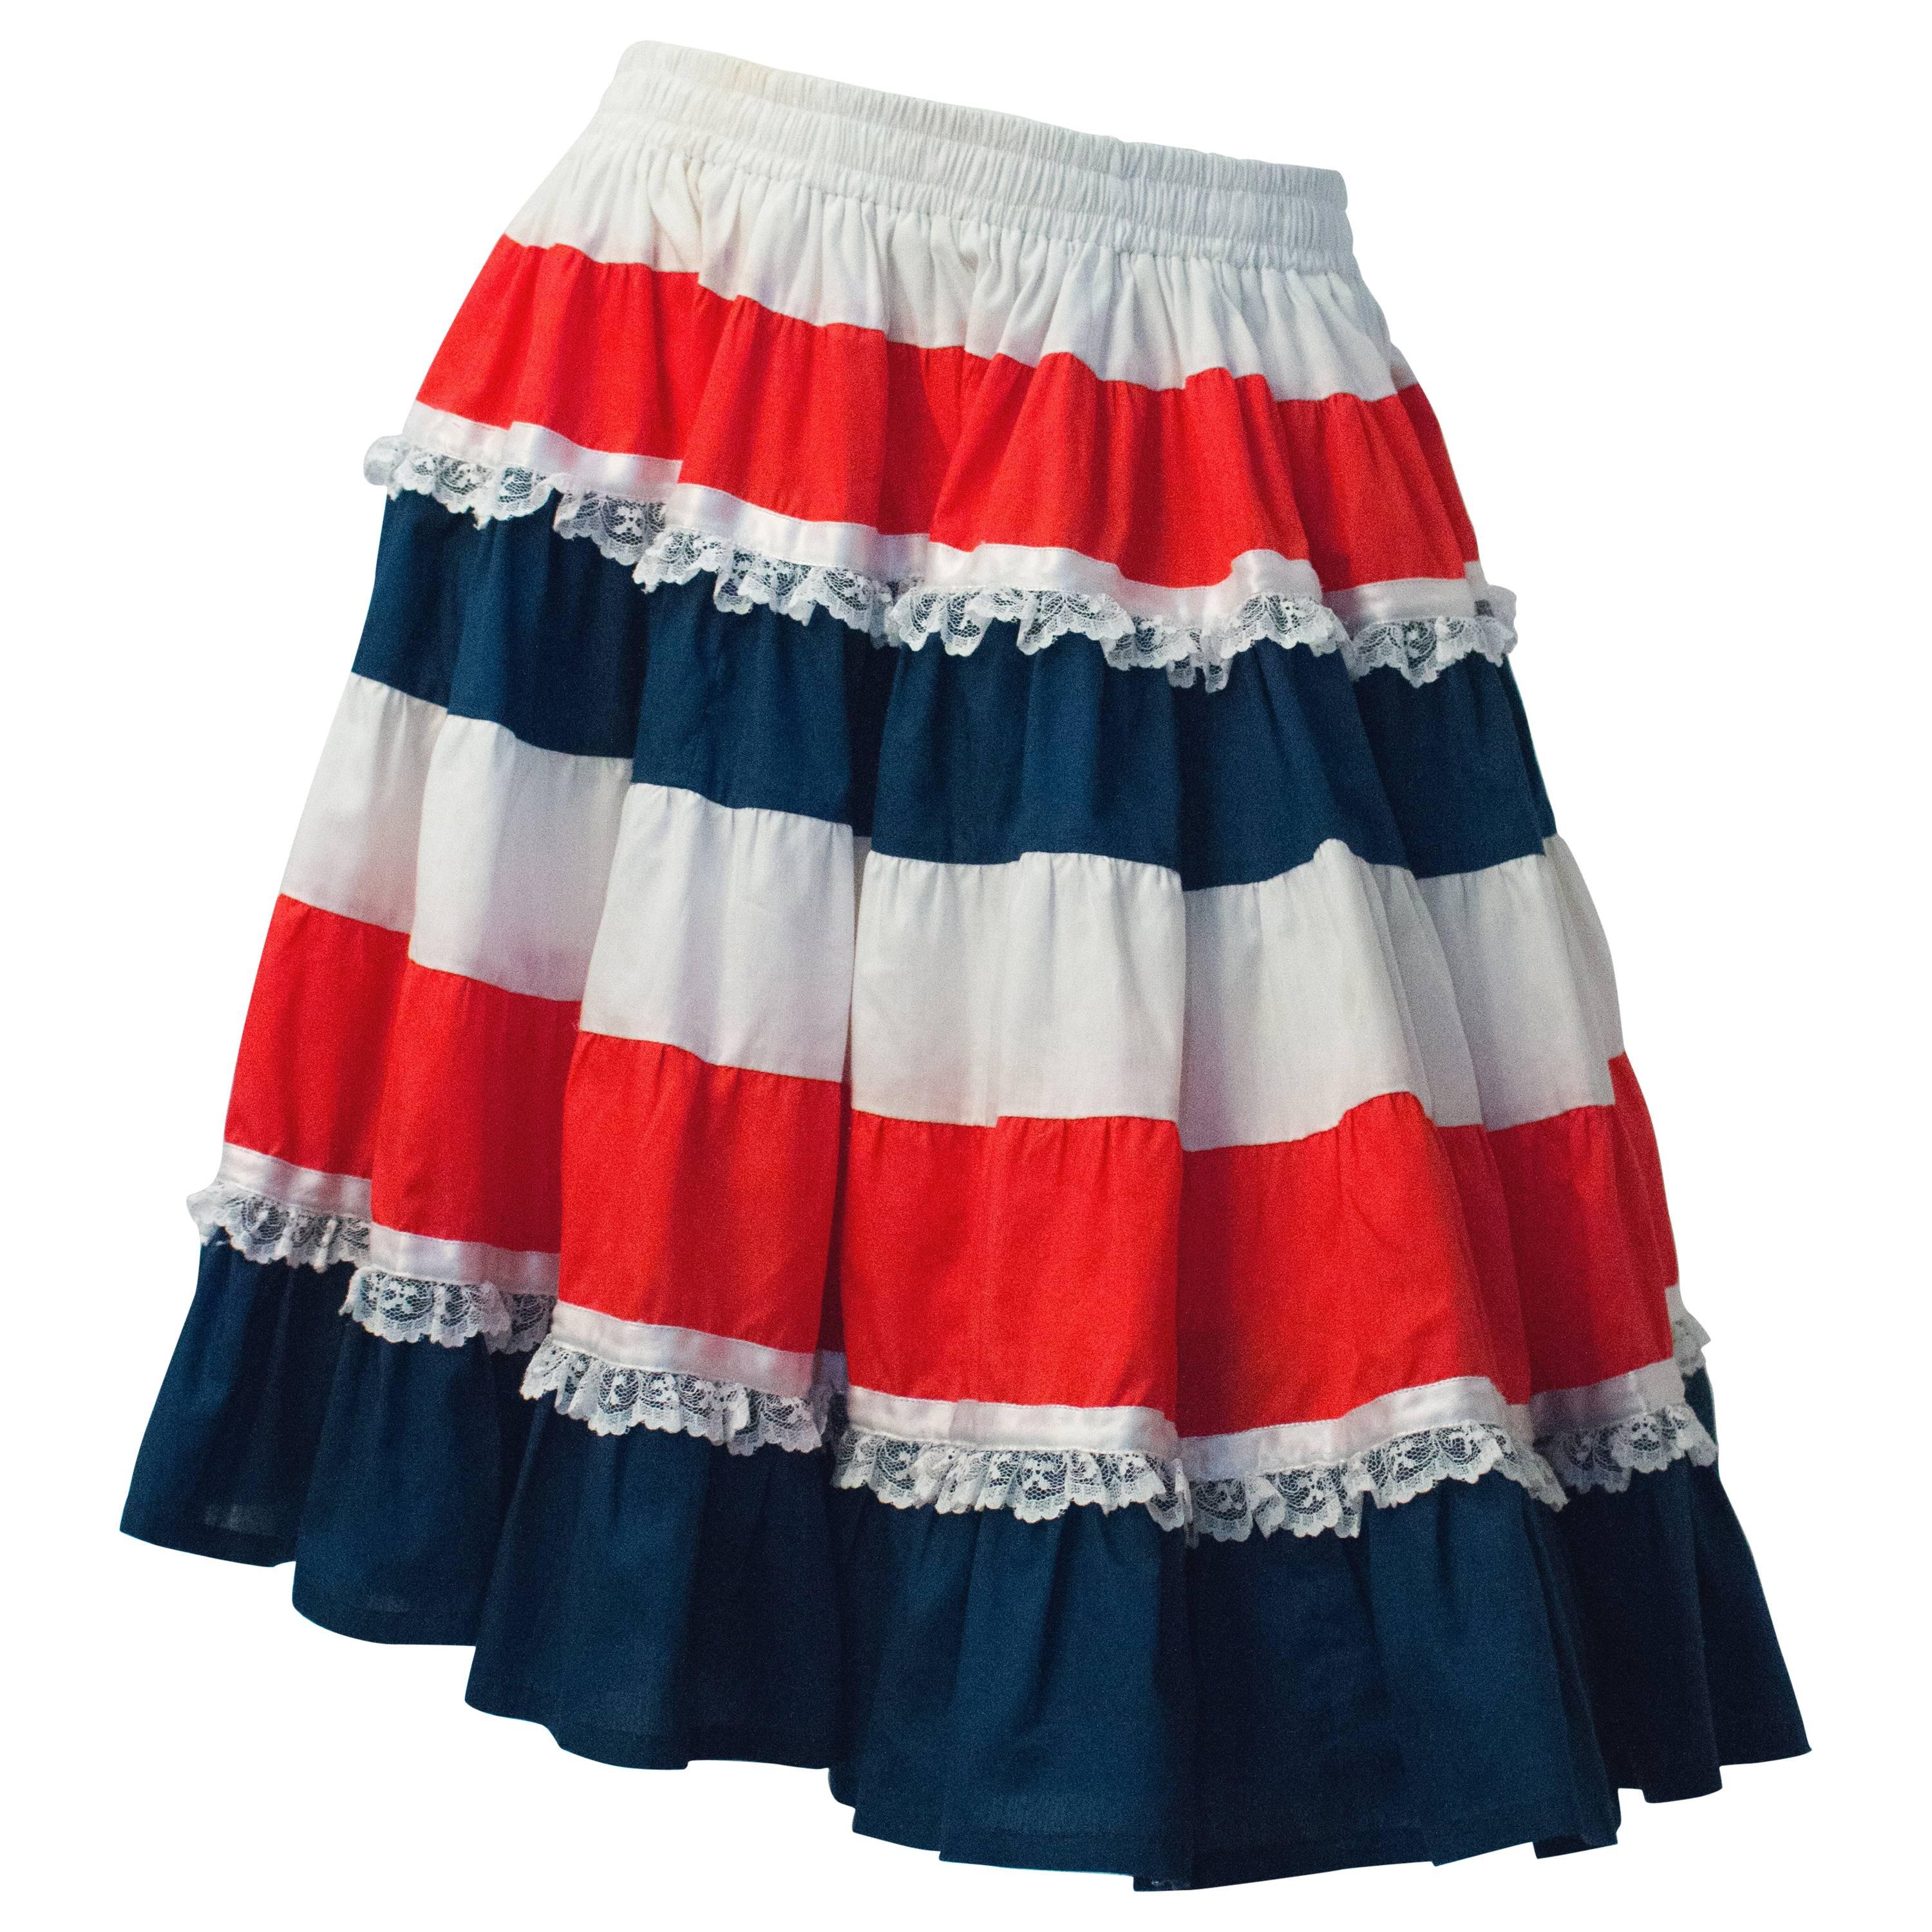 60s Red White and Blue Ruffle Skirt with Lace Trim